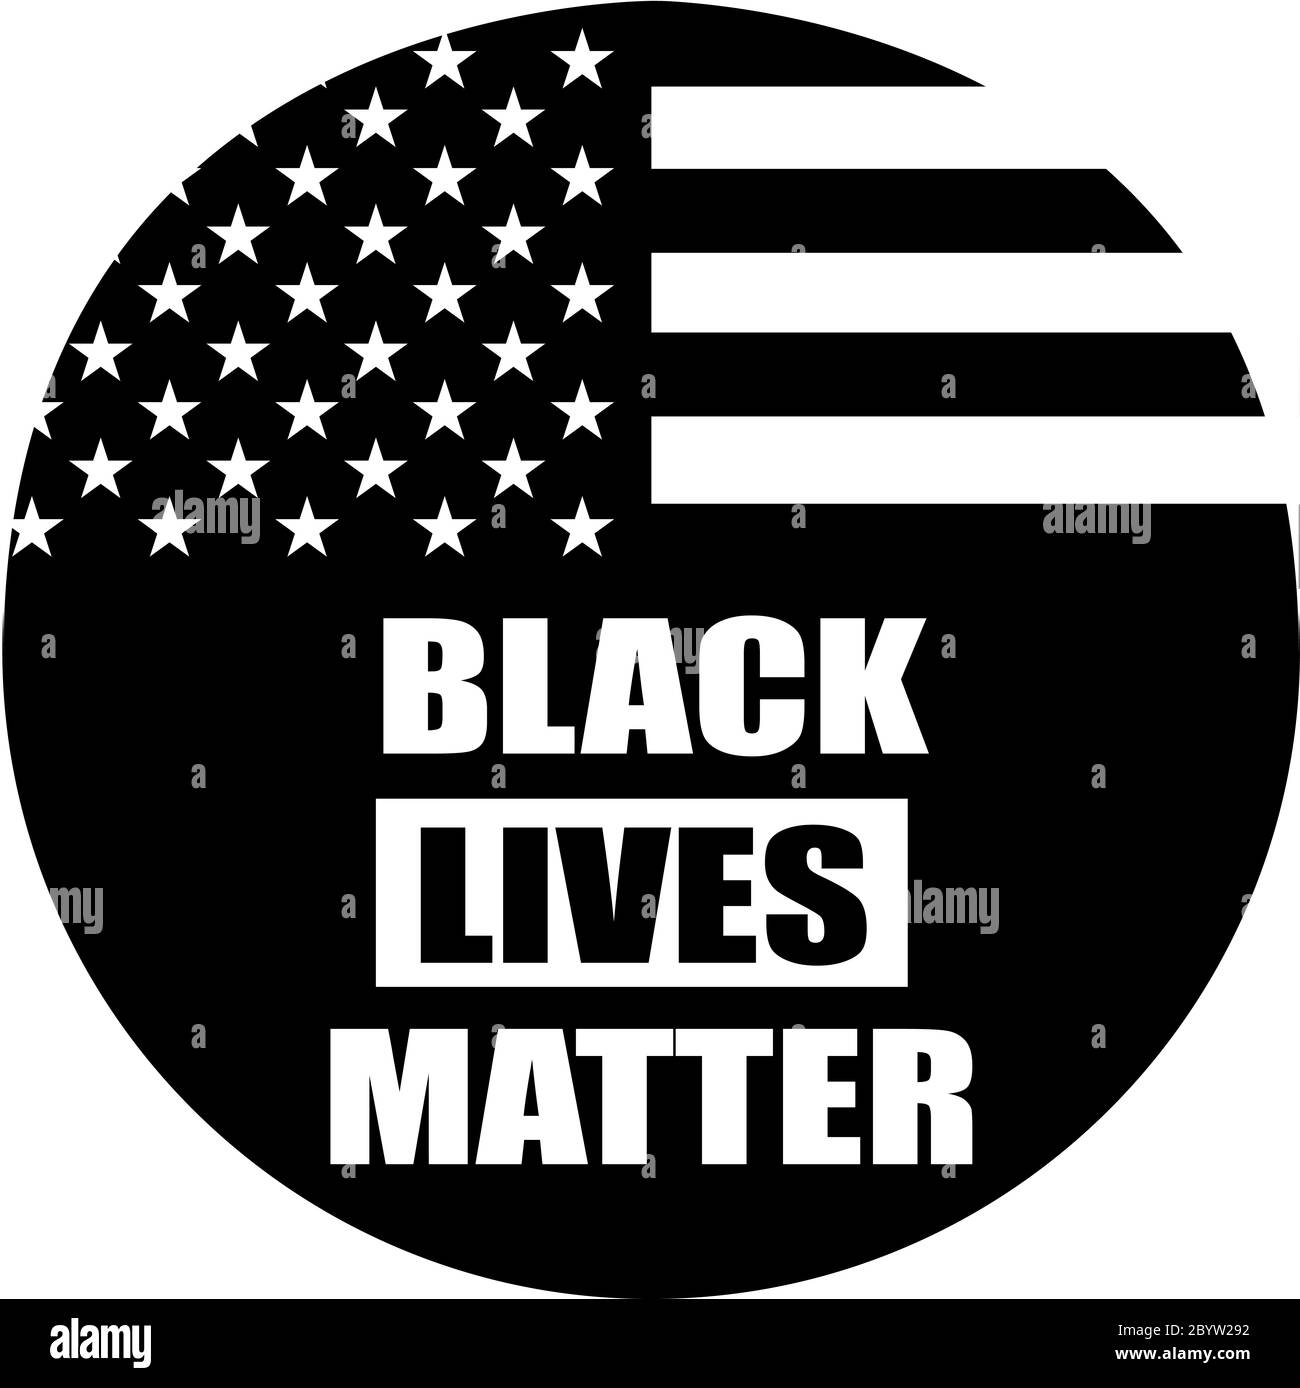 Black Lives Matter text on the round shape with american flag. Concept vector image. Stock Photo